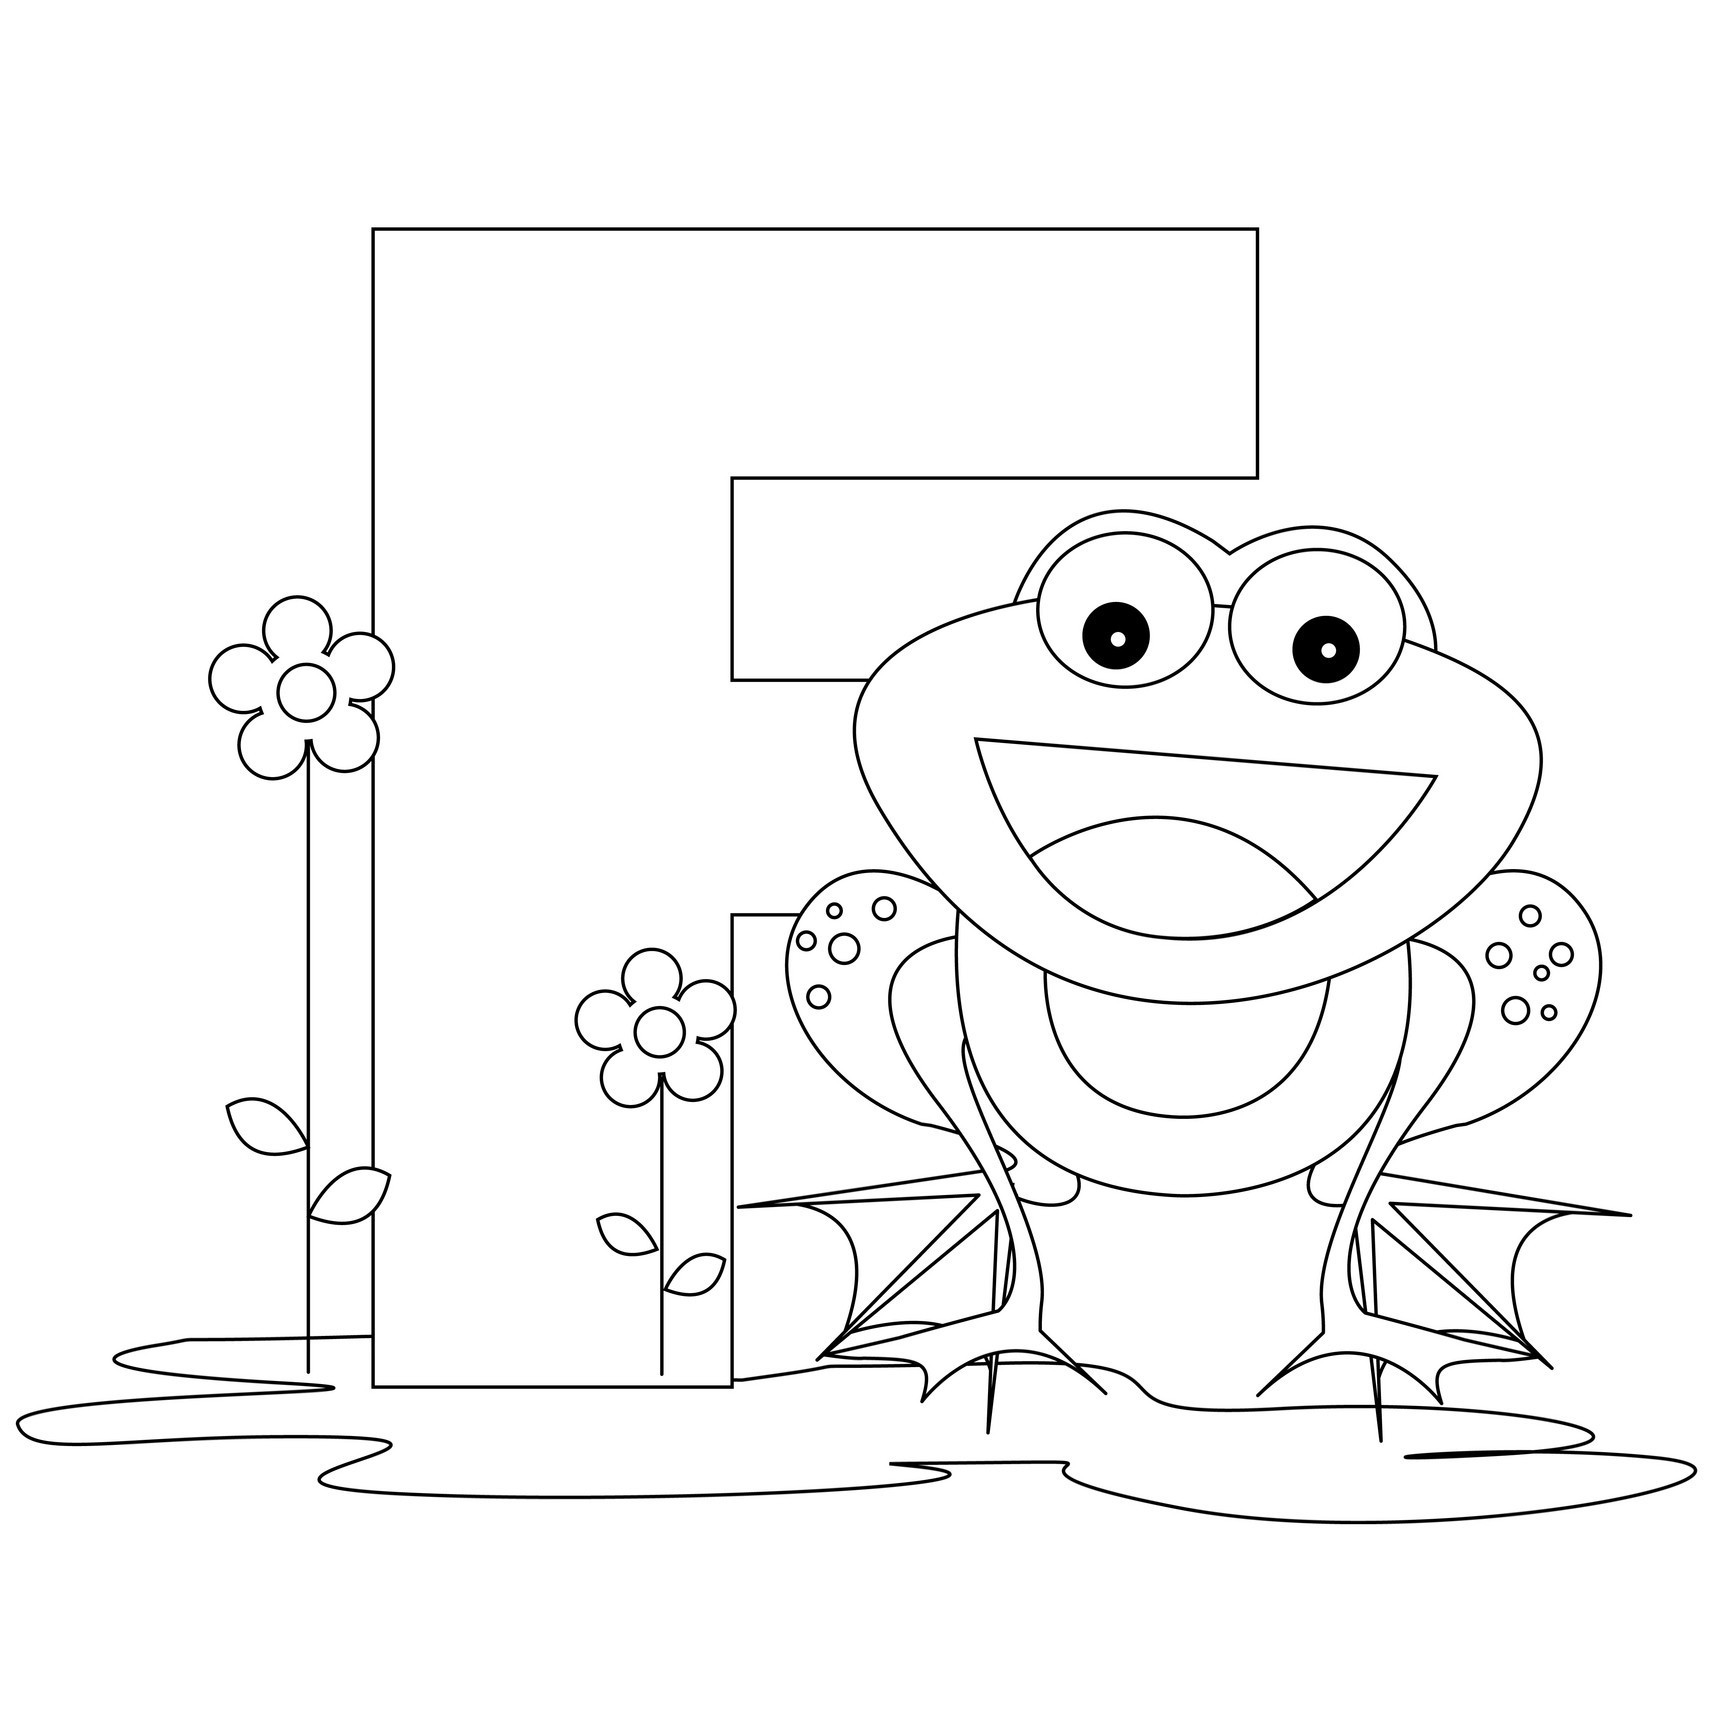 Abc Coloring Pages Free Printable
 Free Printable Alphabet Coloring Pages for Kids Best